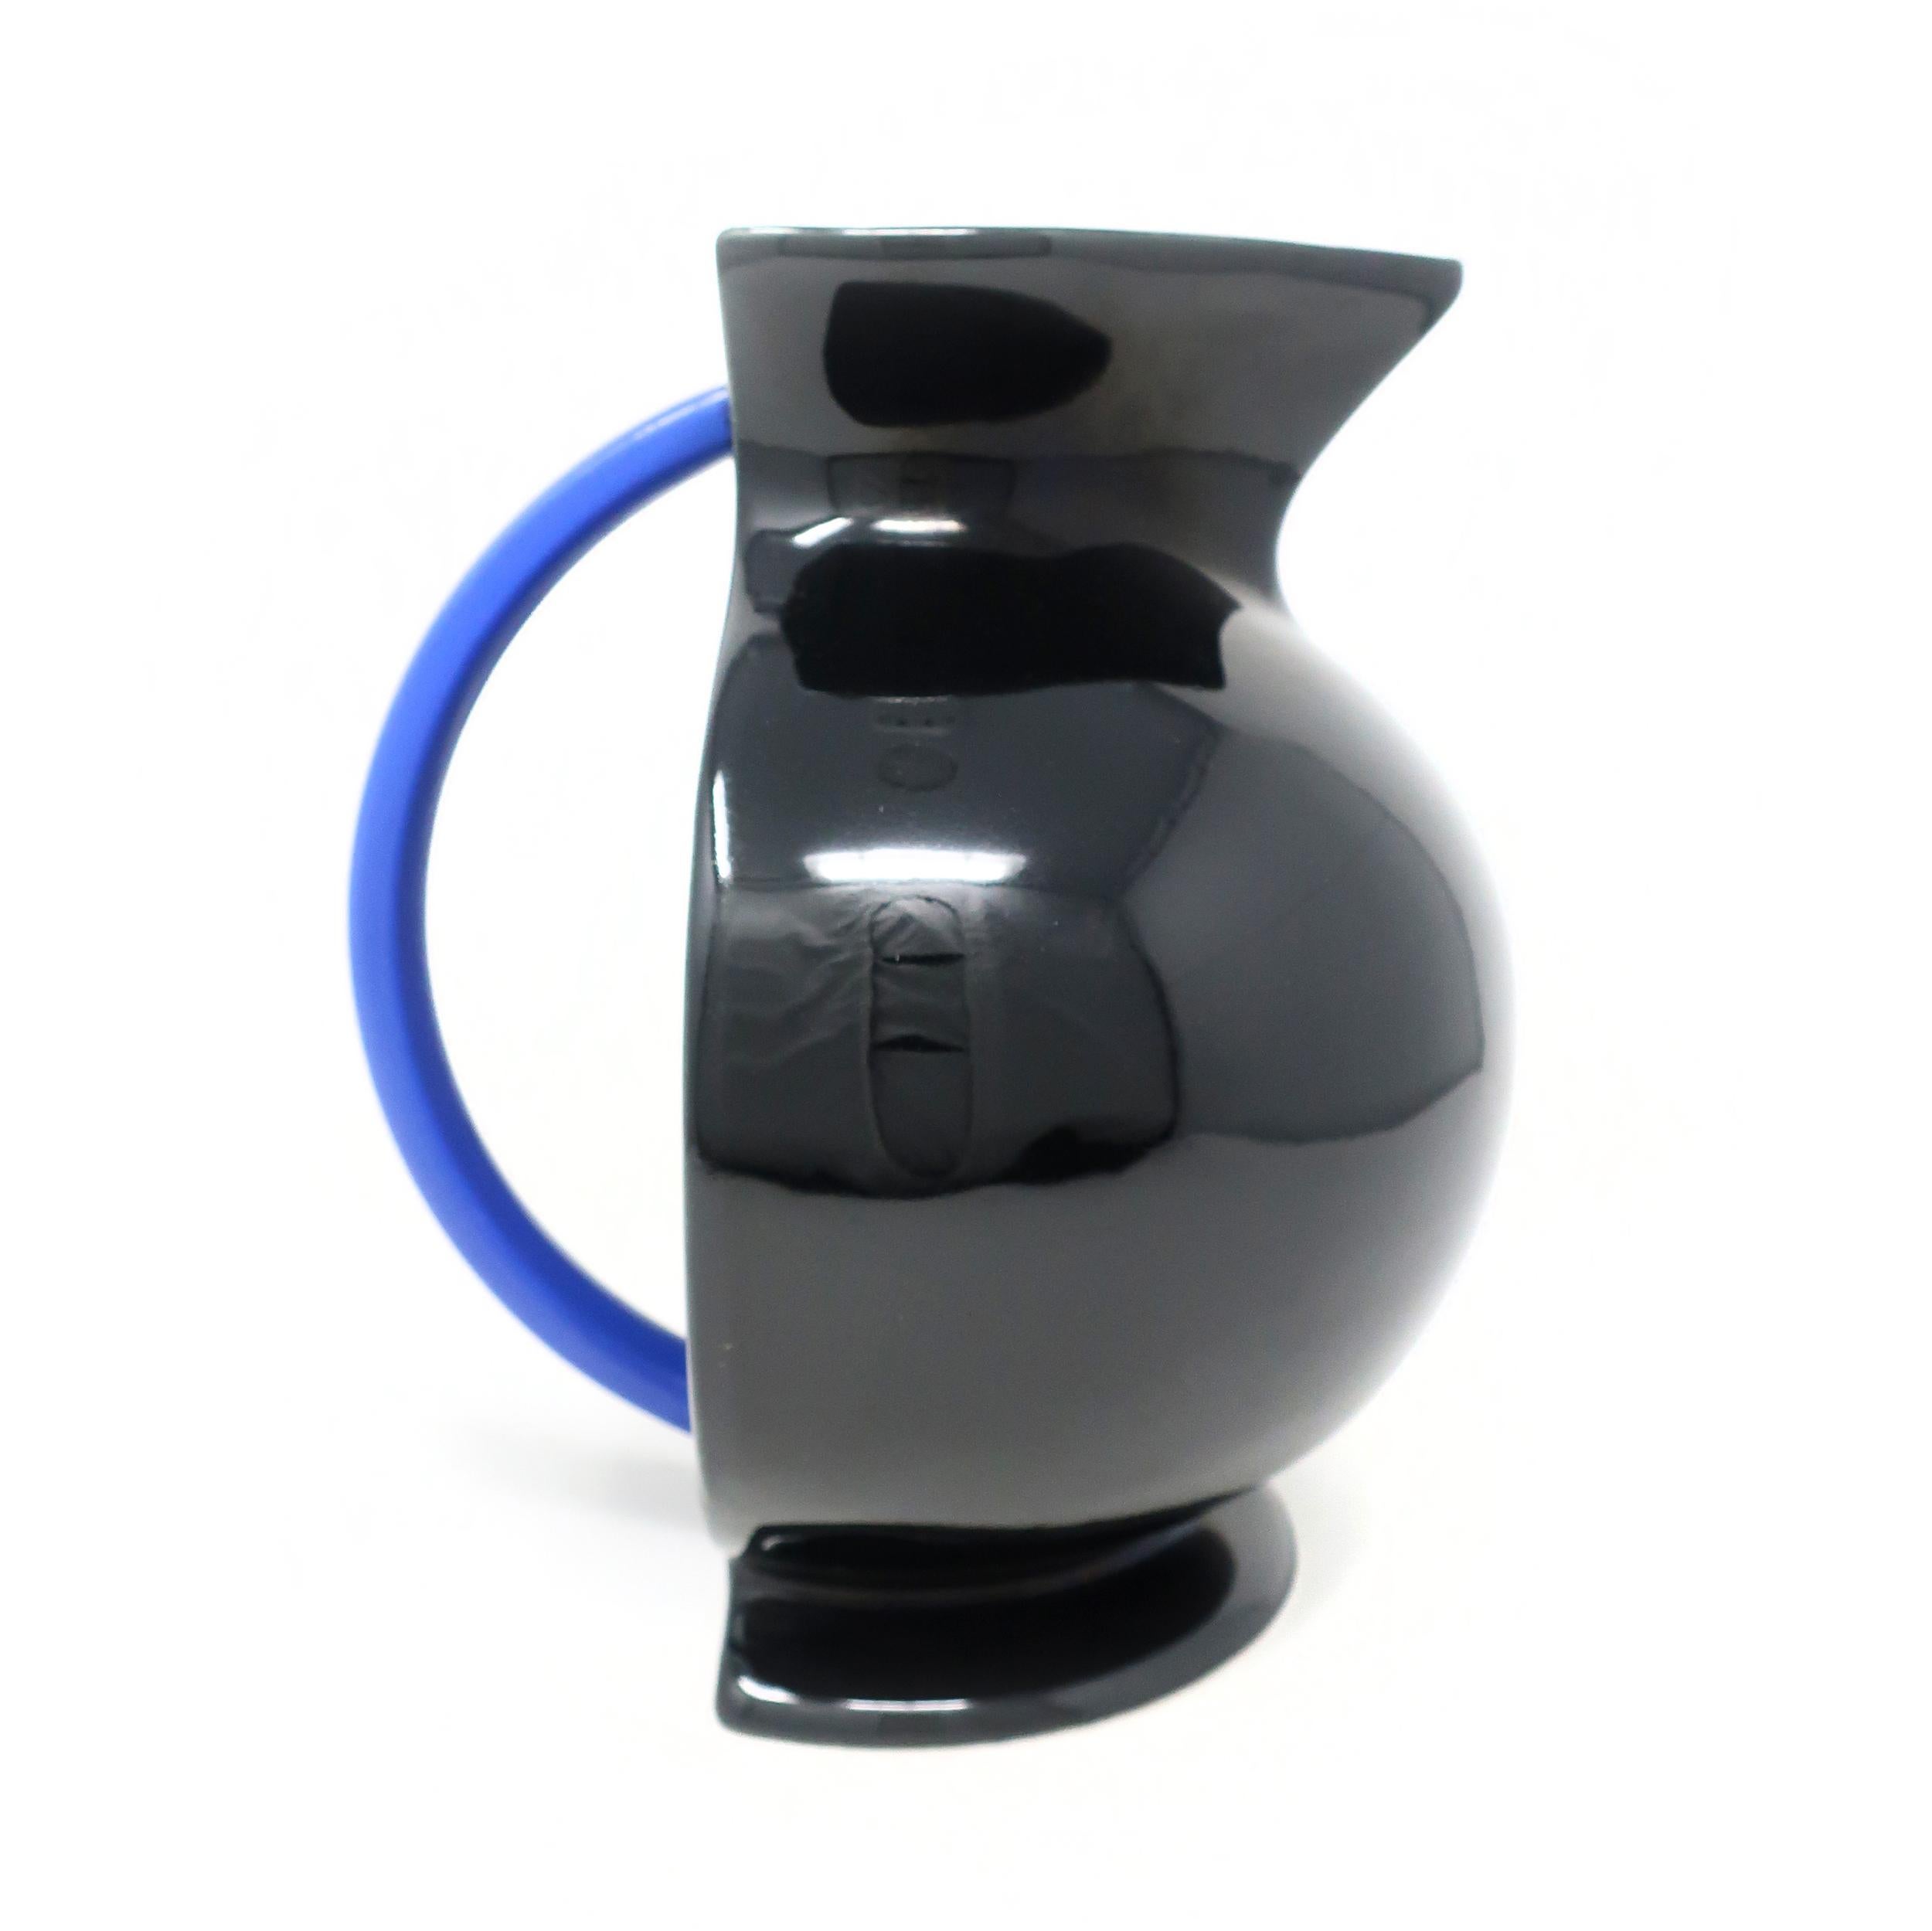 Stunning postmodern ceramic pitcher from the Hollywood collection designed by Marco Zanini for Flavia Montelupo/Bitossi. The black body, rounded blue handle, and flat back show a clear influence from the Memphis group designers, of which Zanini was